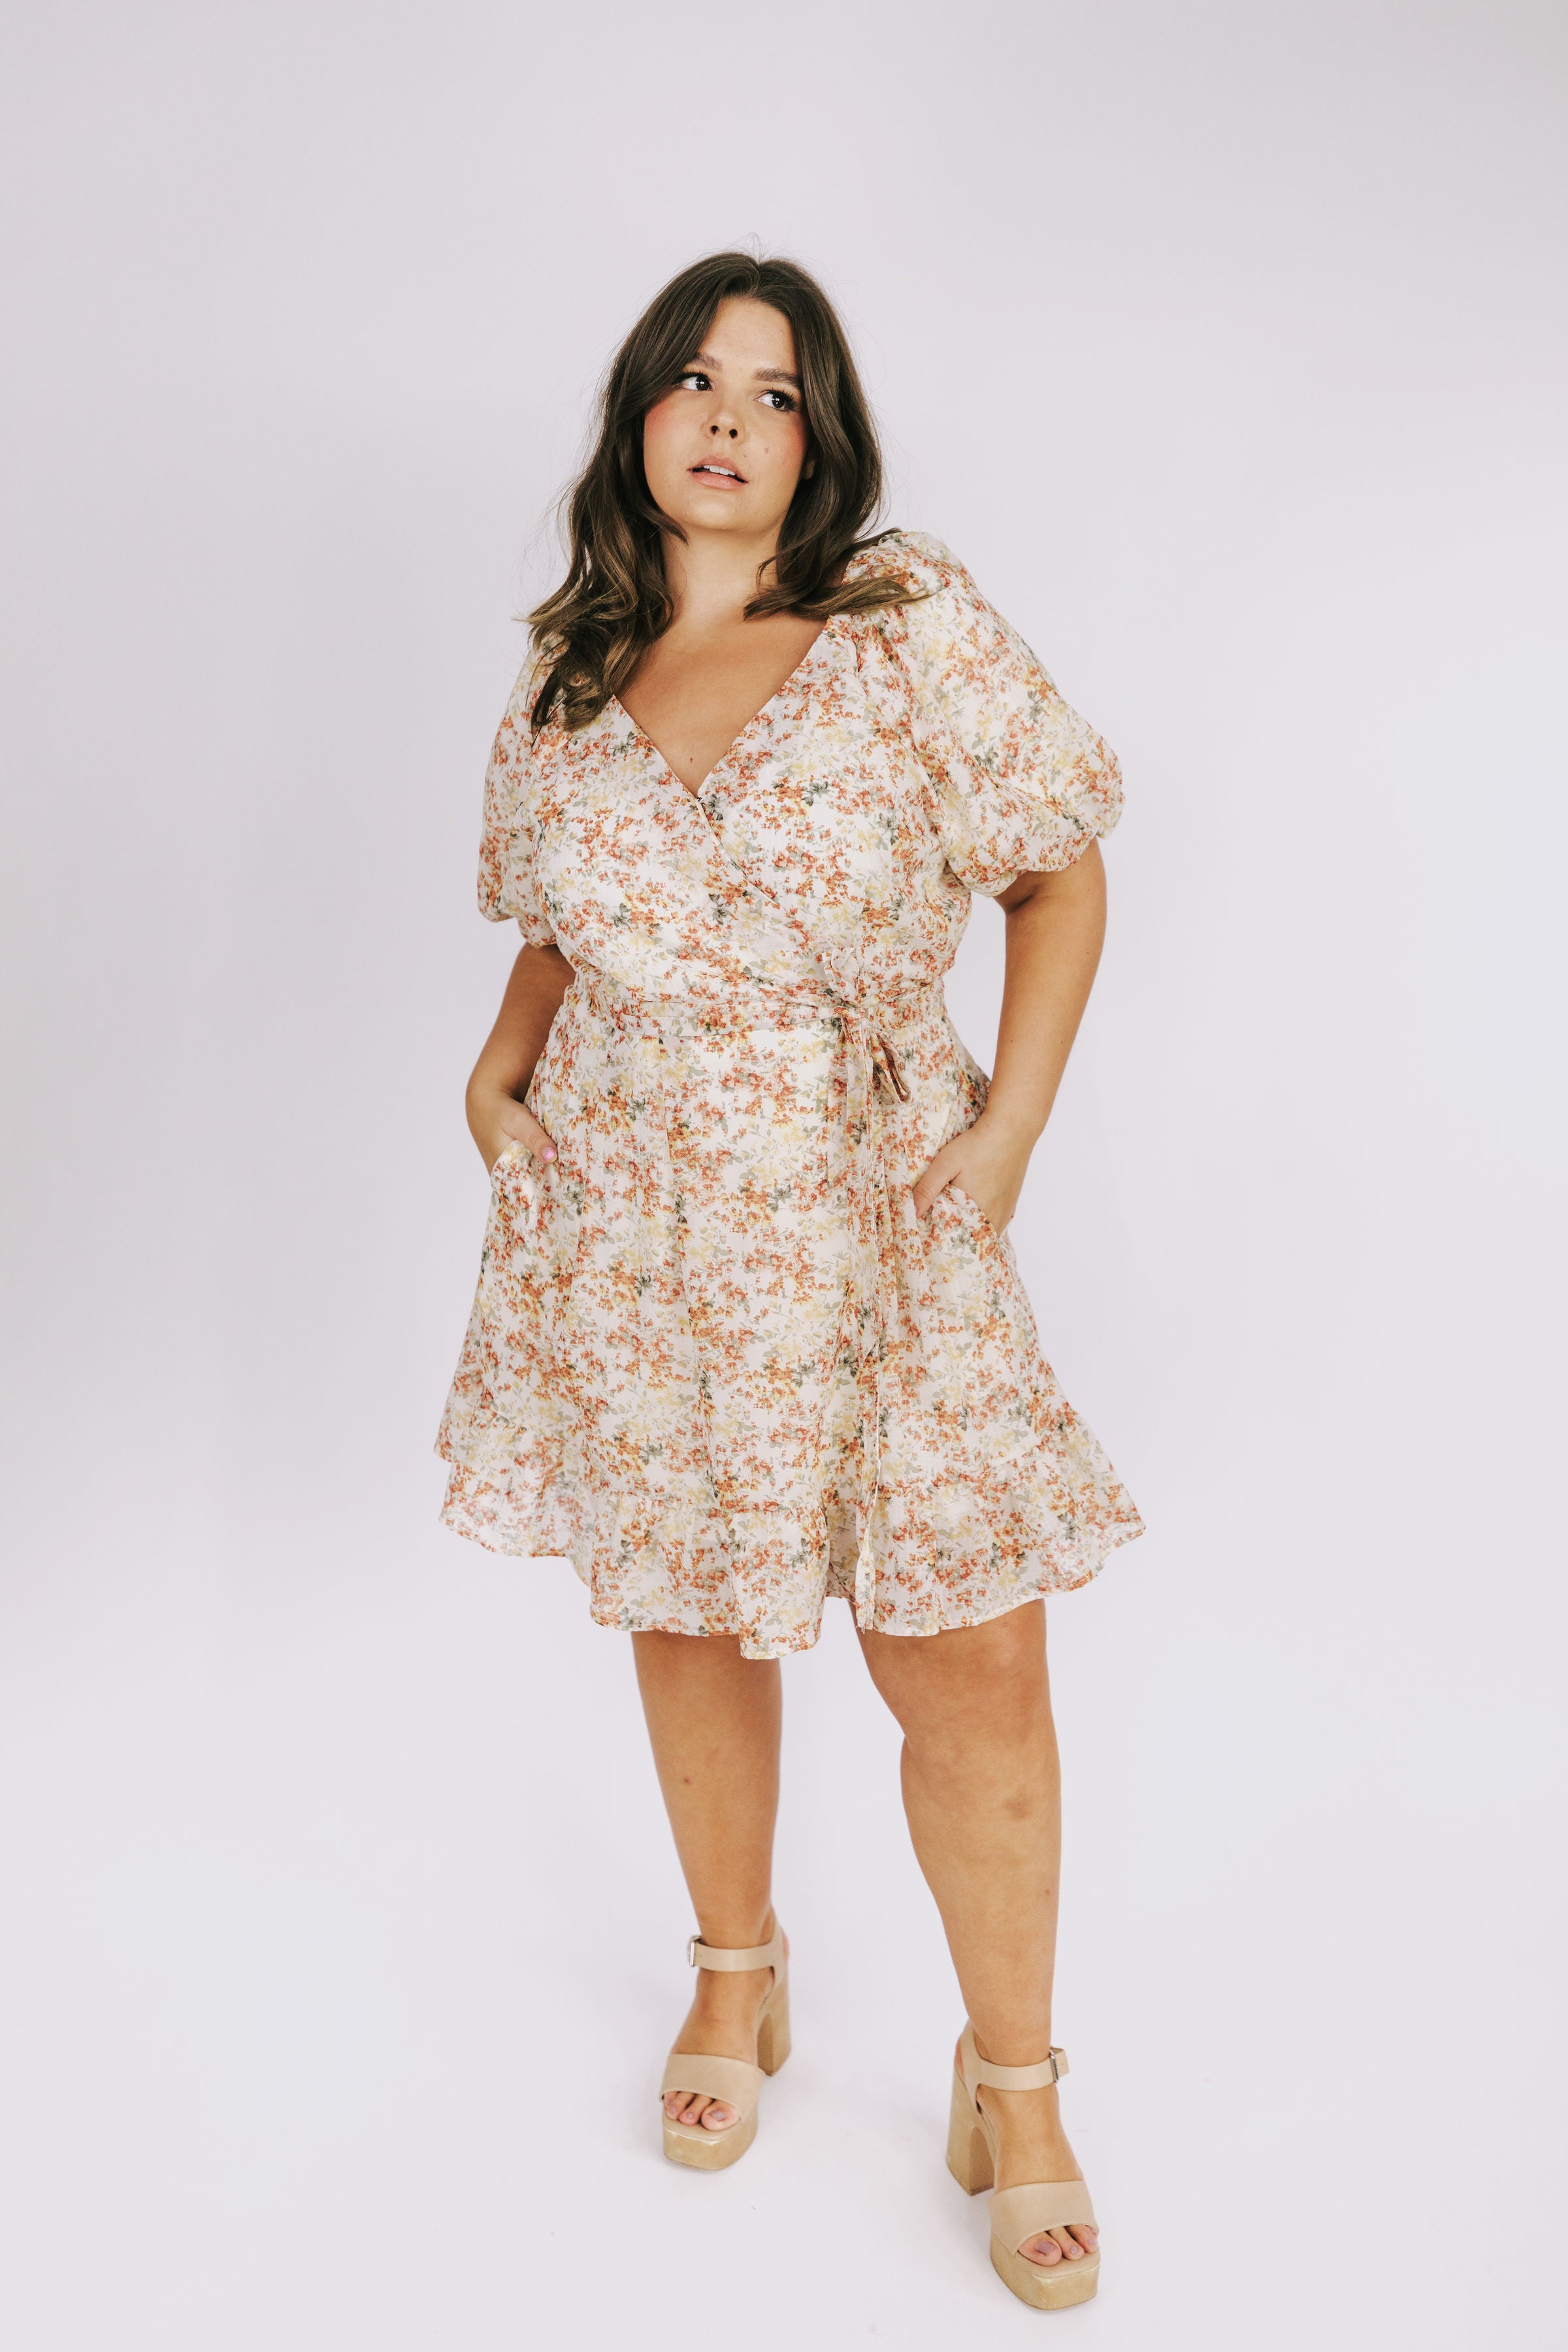 PLUS SIZE - Sunsets With You Dress